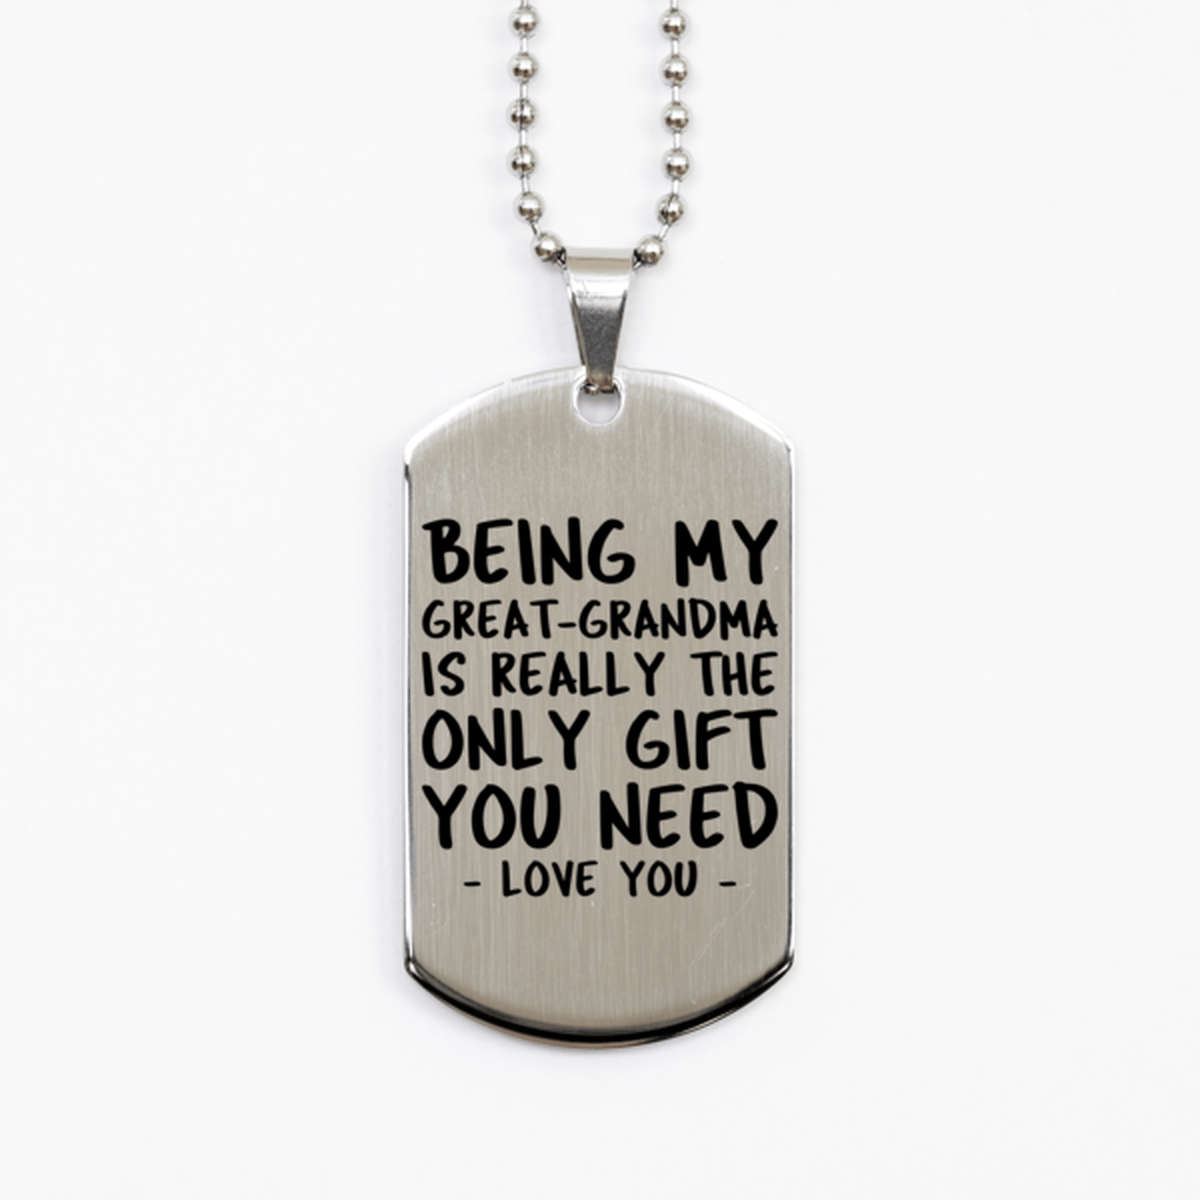 Funny Great-grandma Silver Dog Tag Necklace, Being My Great-grandma Is Really the Only Gift You Need, Best Birthday Gifts for Great-grandma